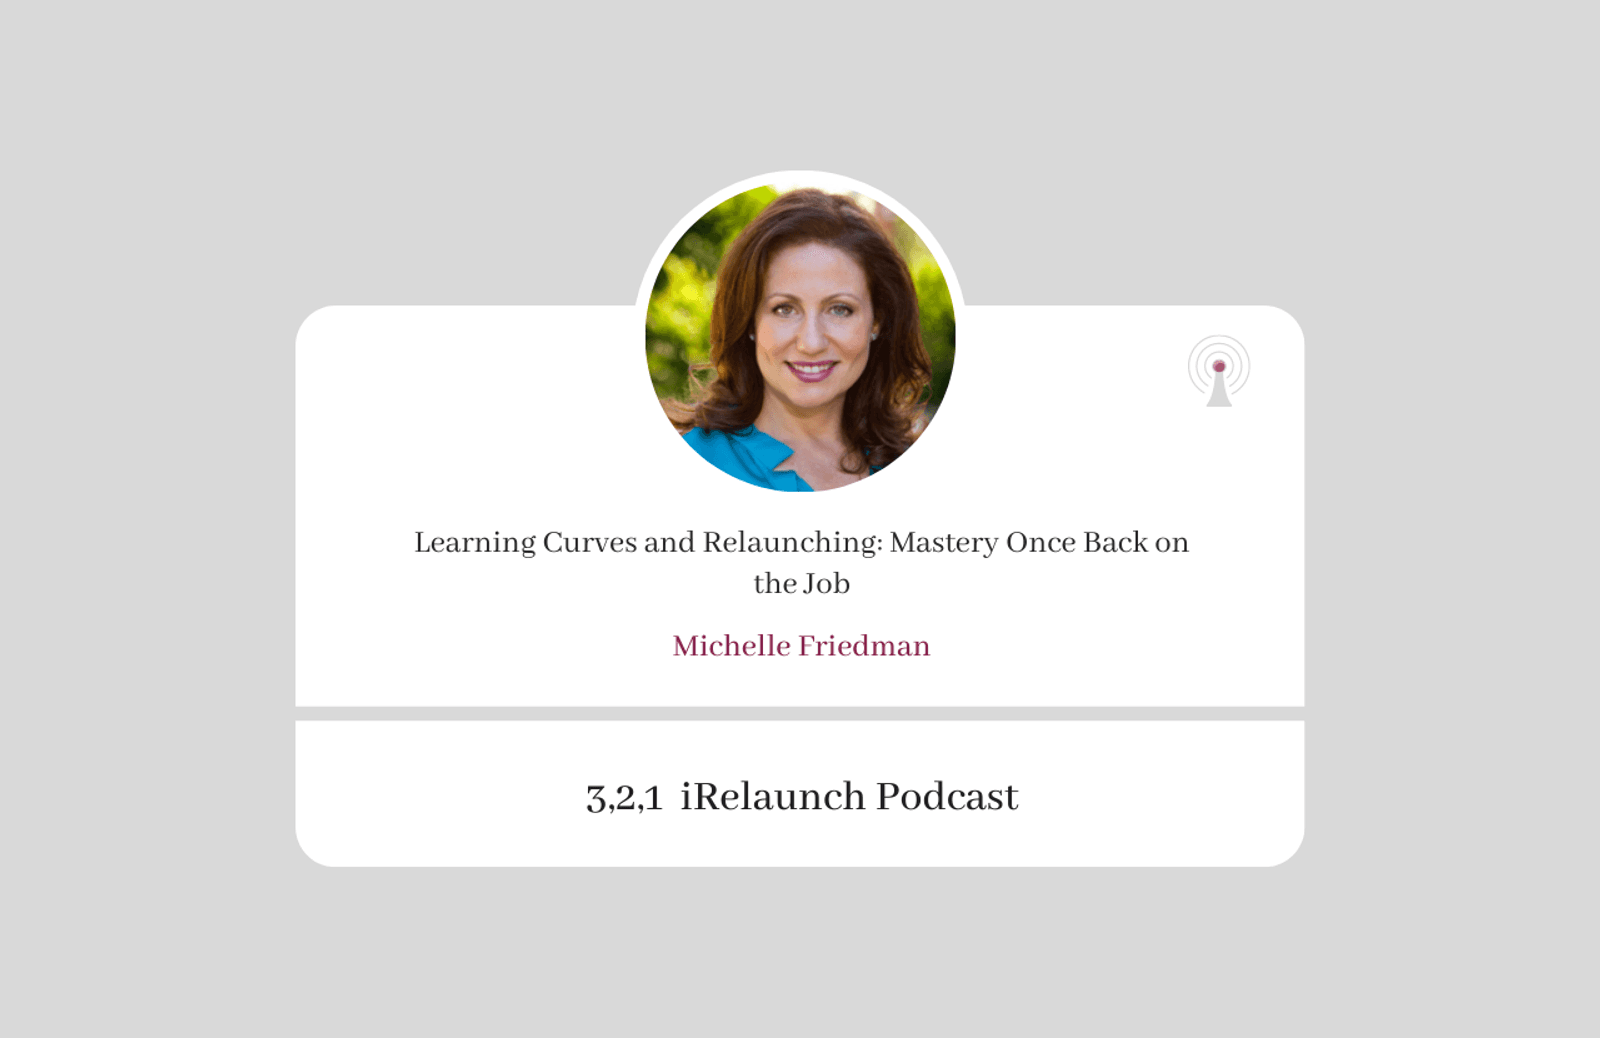 3, 2, 1 iRelaunch Podcast Thumbnail for Episode #73 with Michelle Friedman's headshot. The episode's title is: "Learning Curves and Relaunching: Mastery Once Back on the Job."